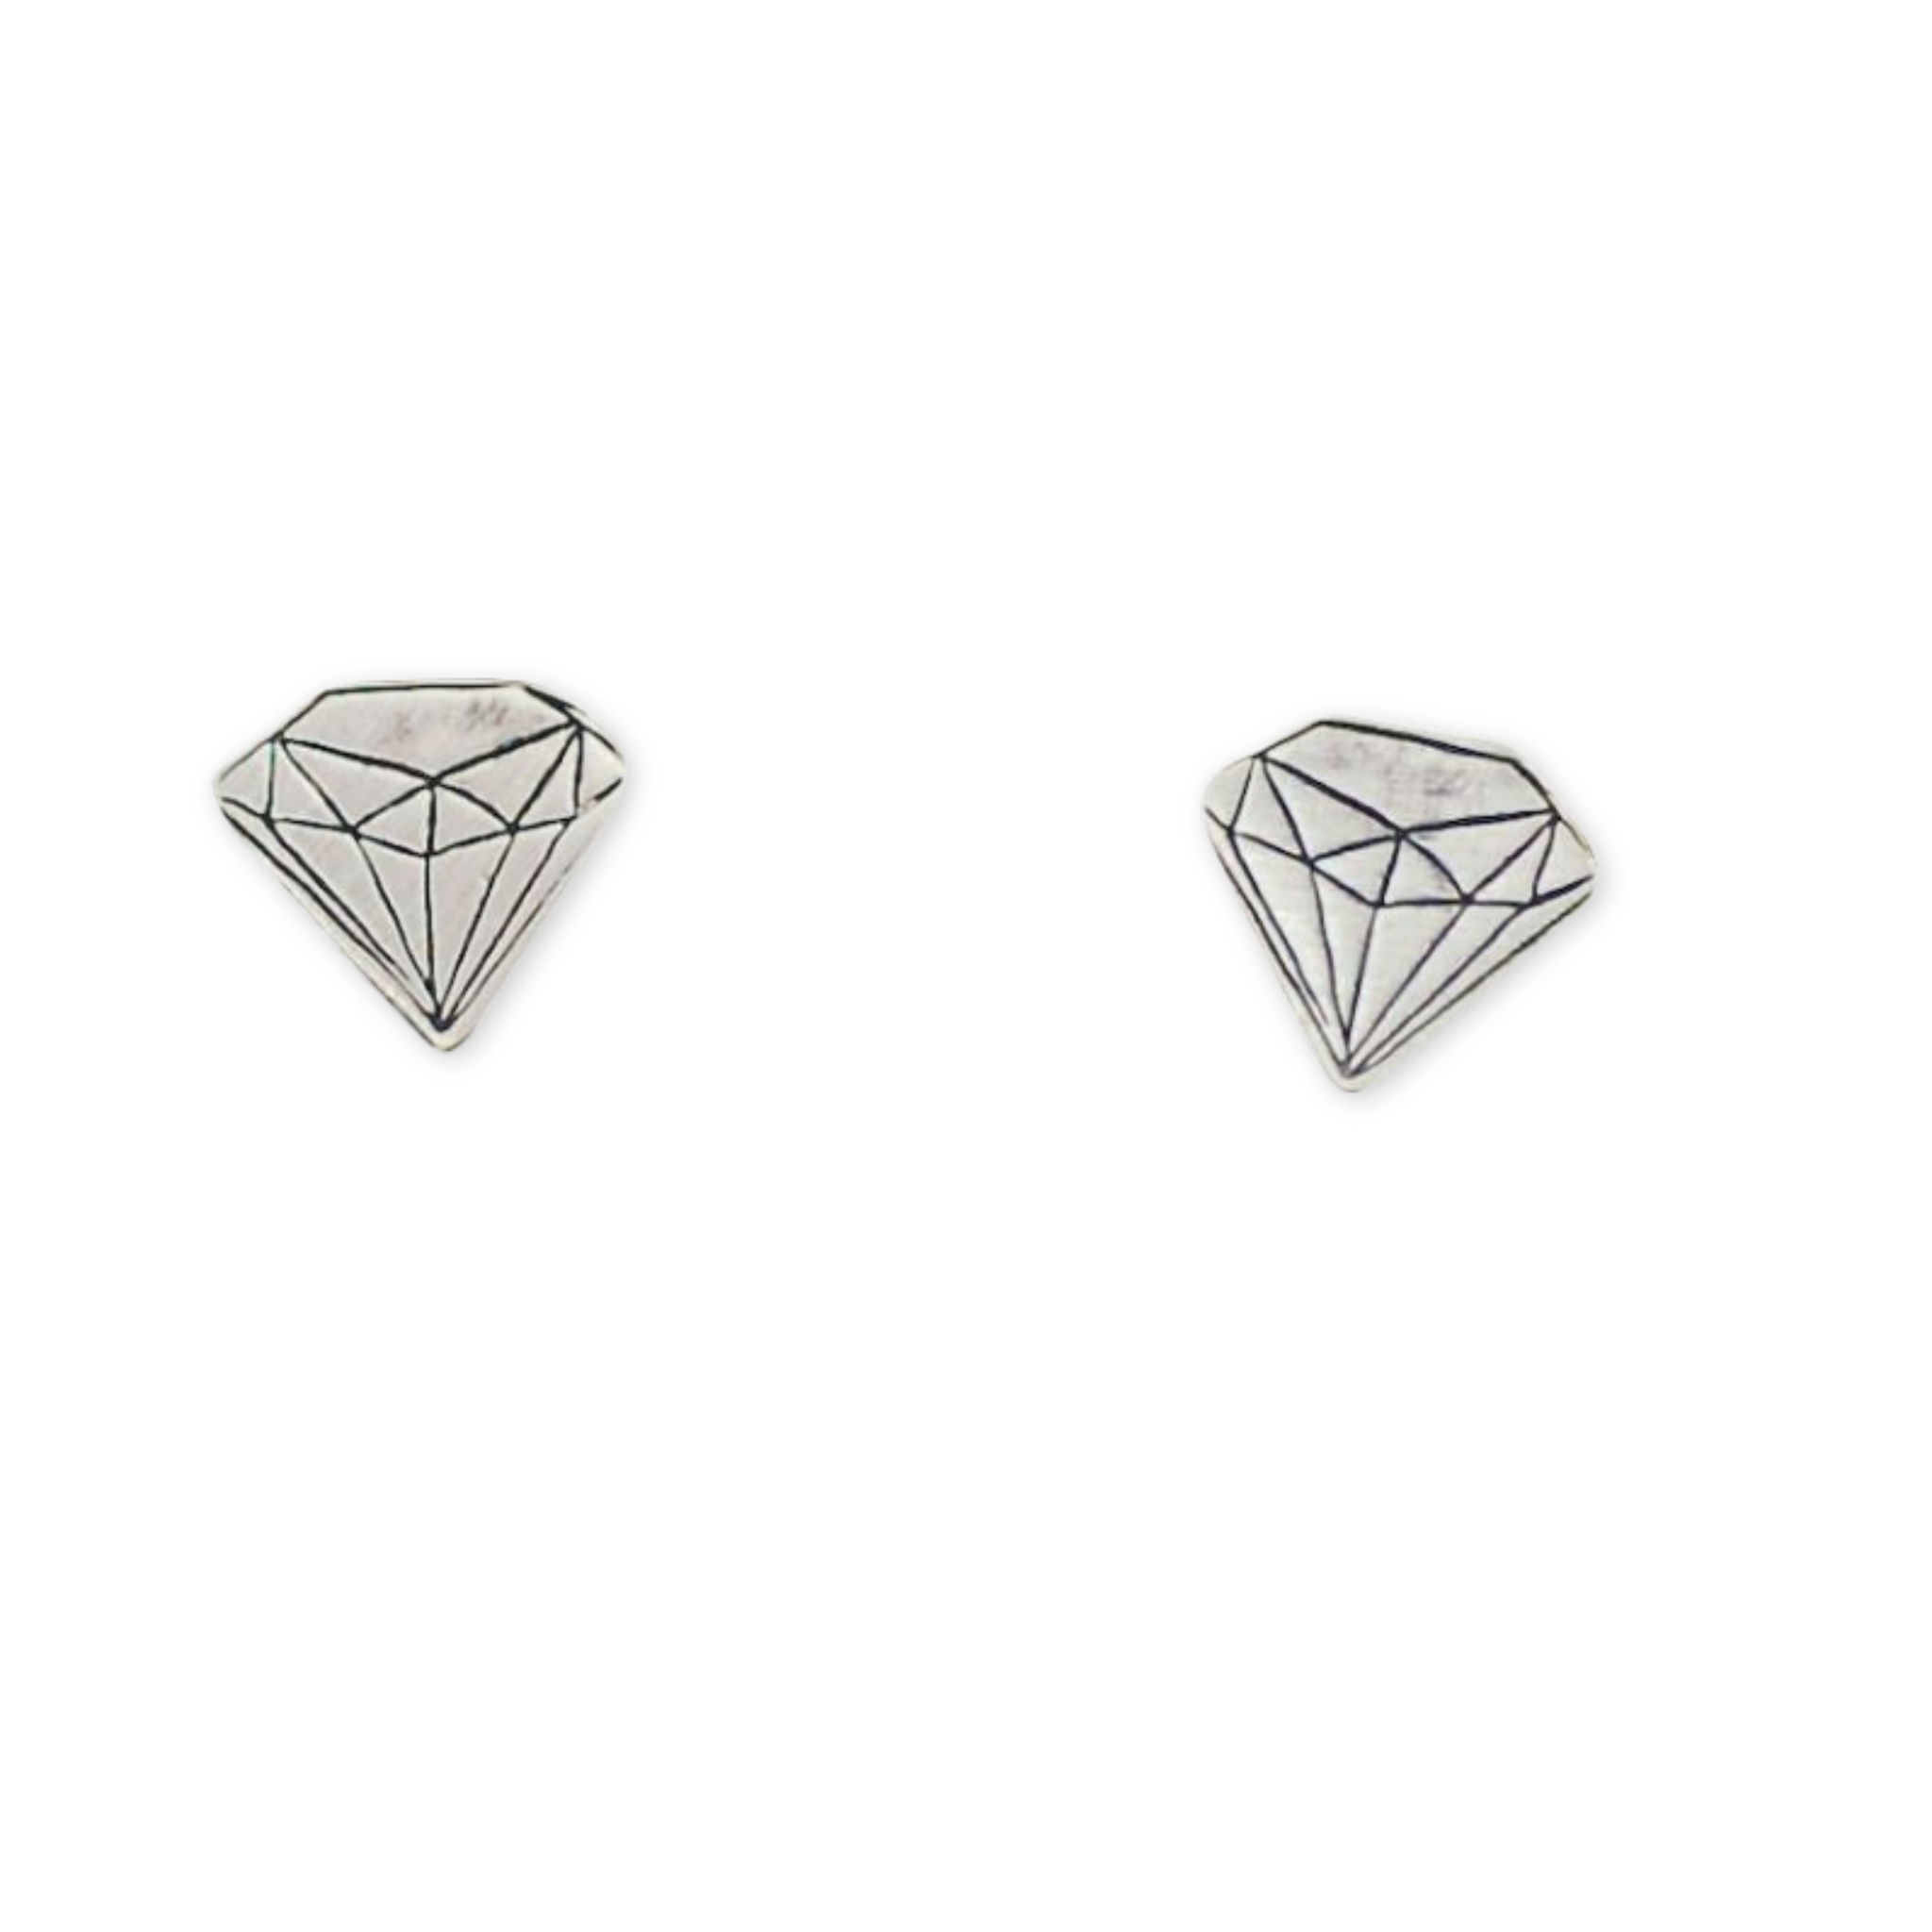 stamped stud earrings in the shape of a diamond